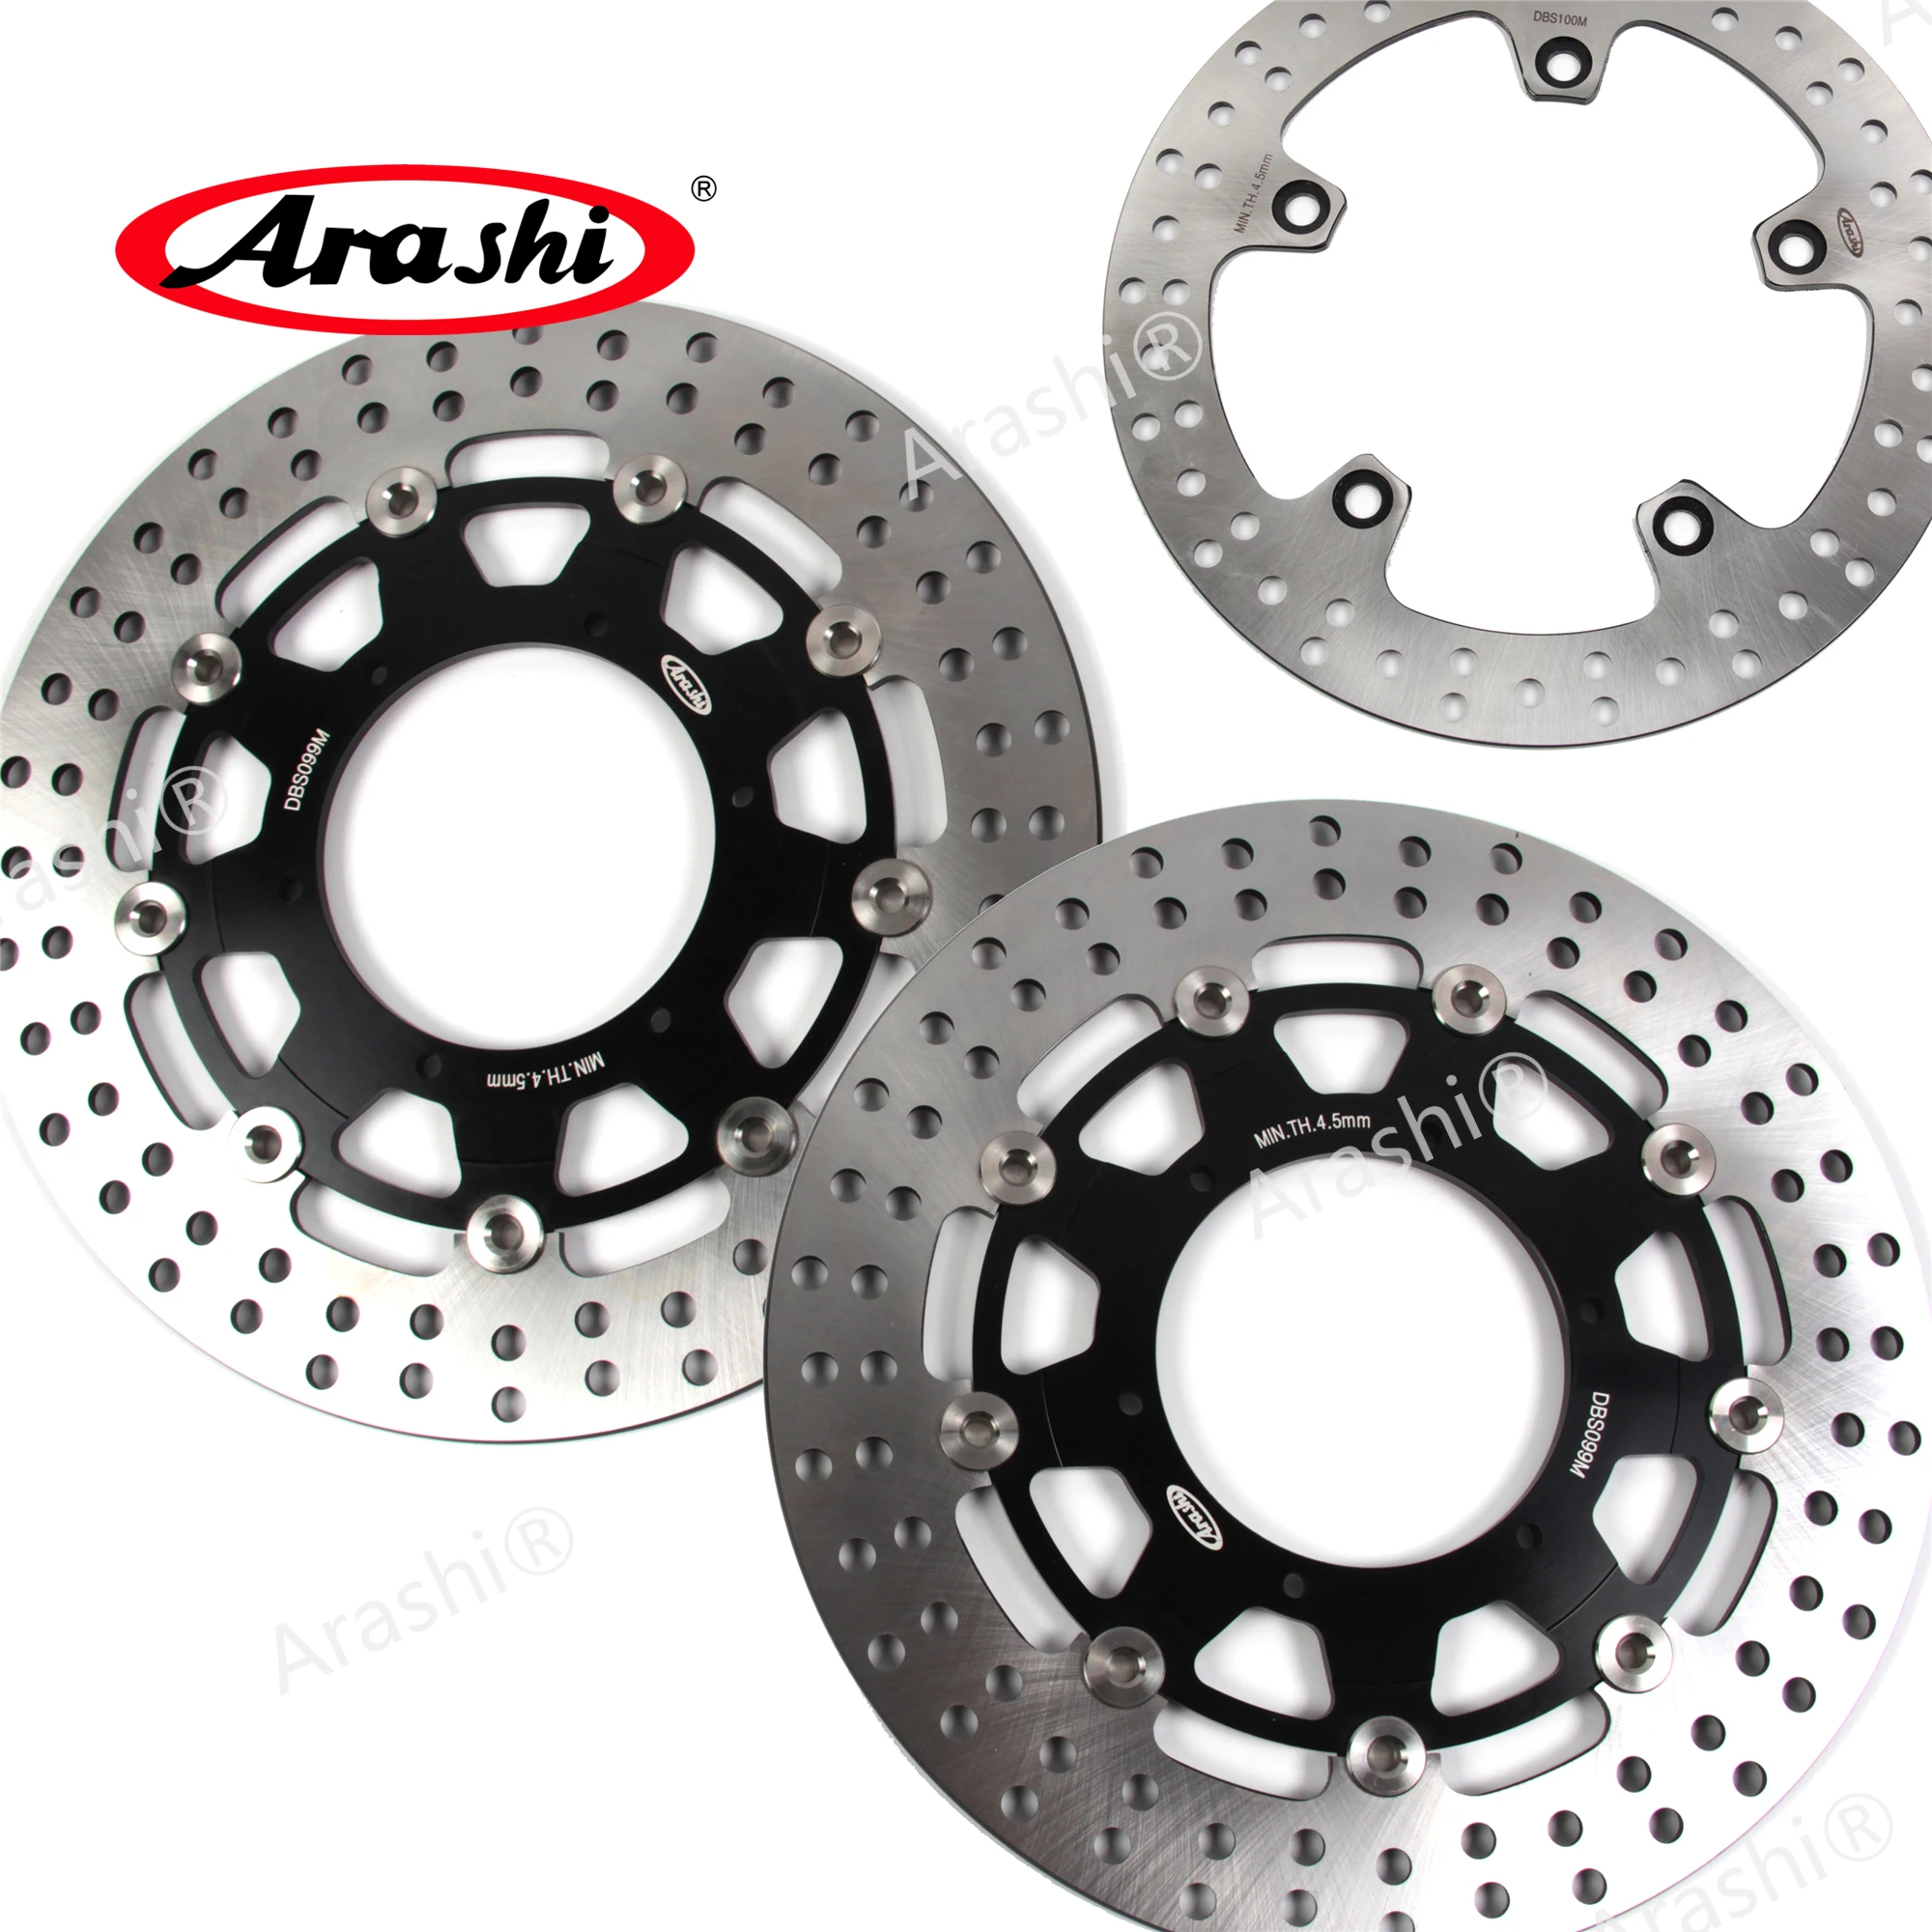 F900R F900XR 2020-2021 Motorcycle Replacement Accessories GS850 GS 850 Arashi Rear Brake Disc Rotors for BMW F850GS ABS 2019-2021 ADVENTURE ADV 